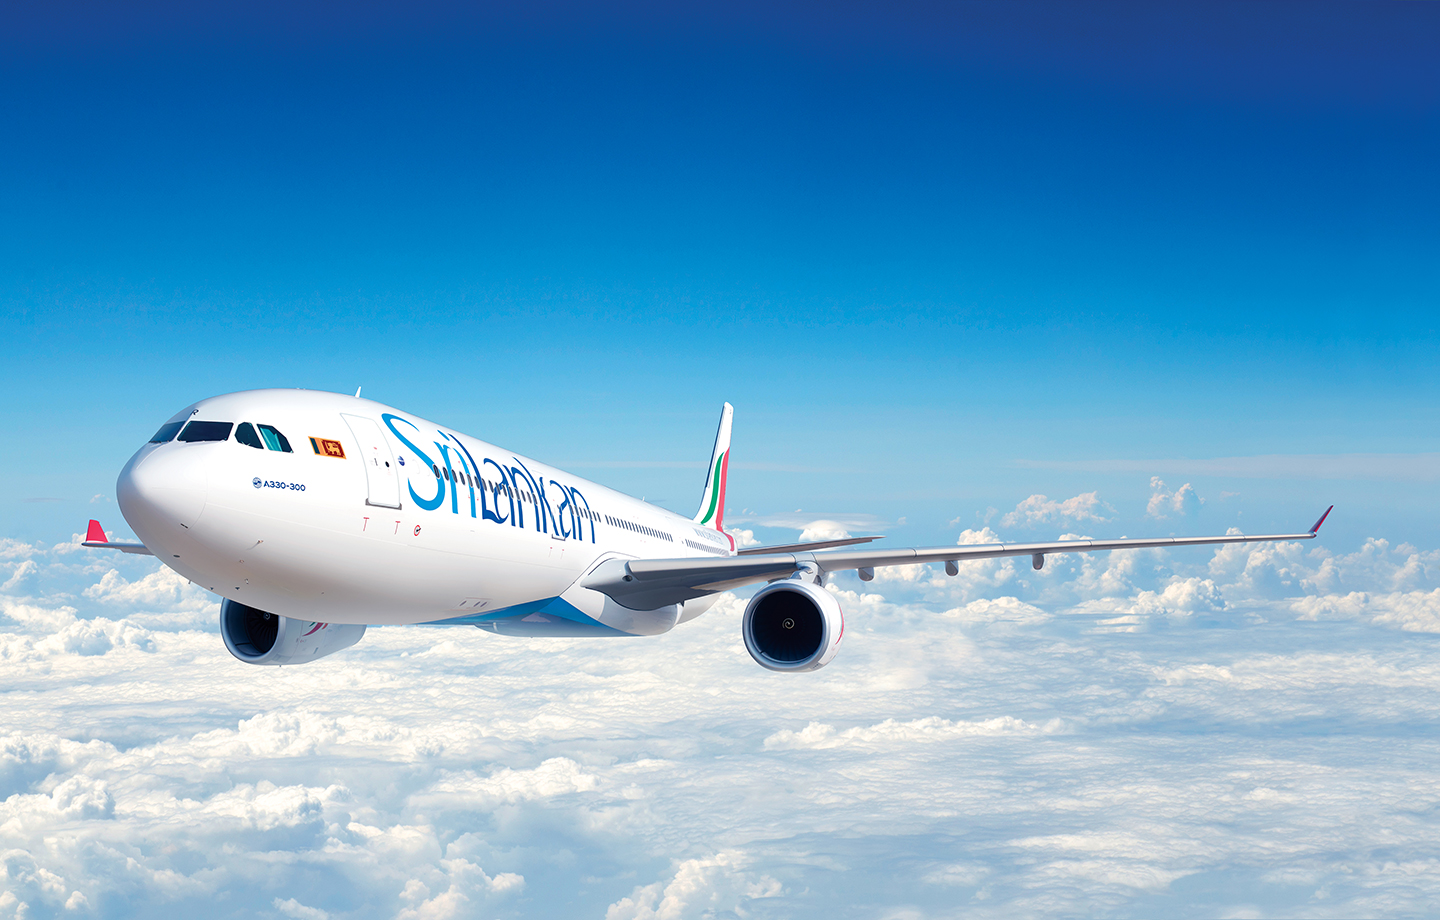 SriLankan Airlines was awarded Four Star rating for Major Official Airline